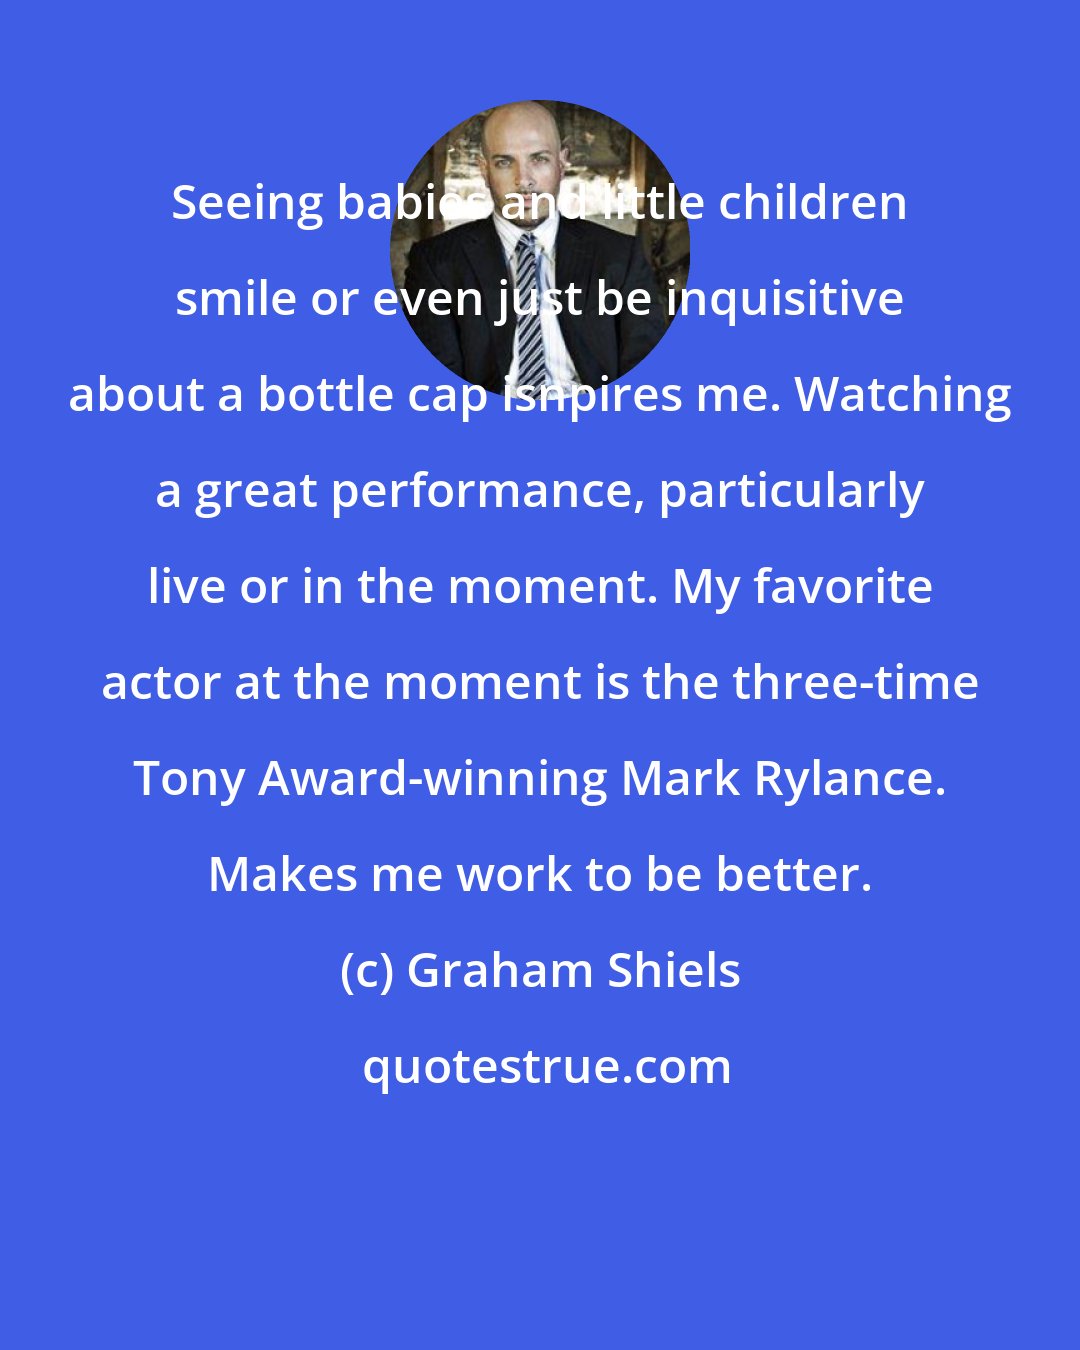 Graham Shiels: Seeing babies and little children smile or even just be inquisitive about a bottle cap isnpires me. Watching a great performance, particularly live or in the moment. My favorite actor at the moment is the three-time Tony Award-winning Mark Rylance. Makes me work to be better.